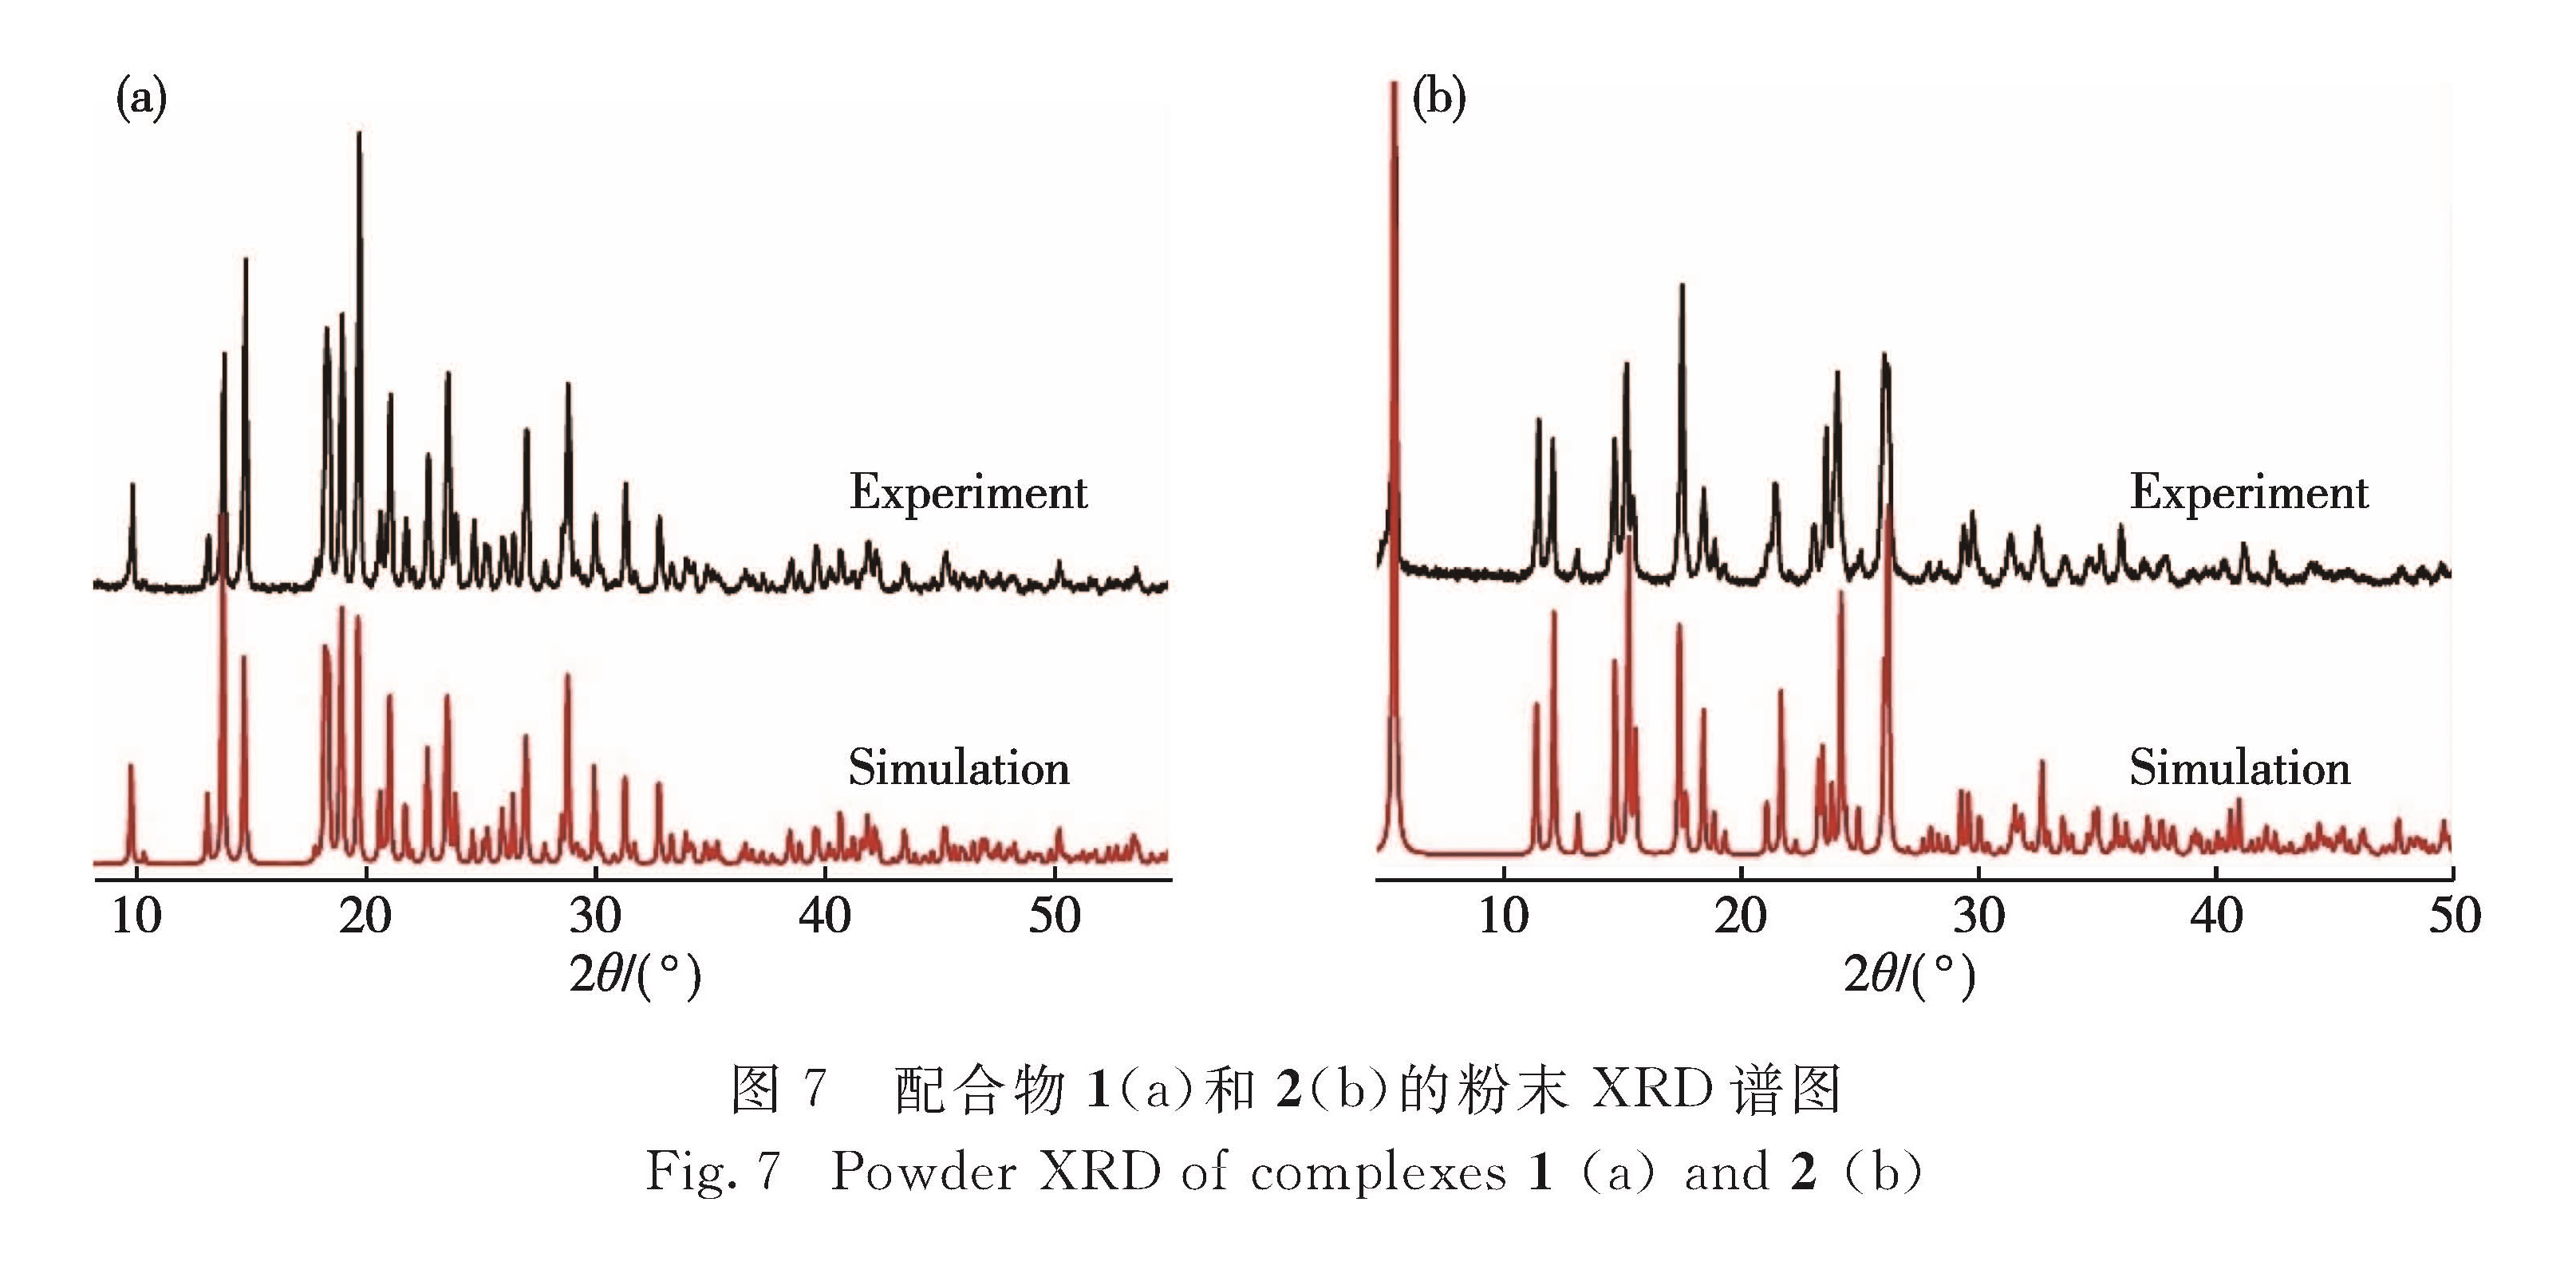 图7 配合物1(a)和2(b)的粉末XRD谱图<br/>Fig.7 Powder XRD of complexes 1(a)and 2(b)